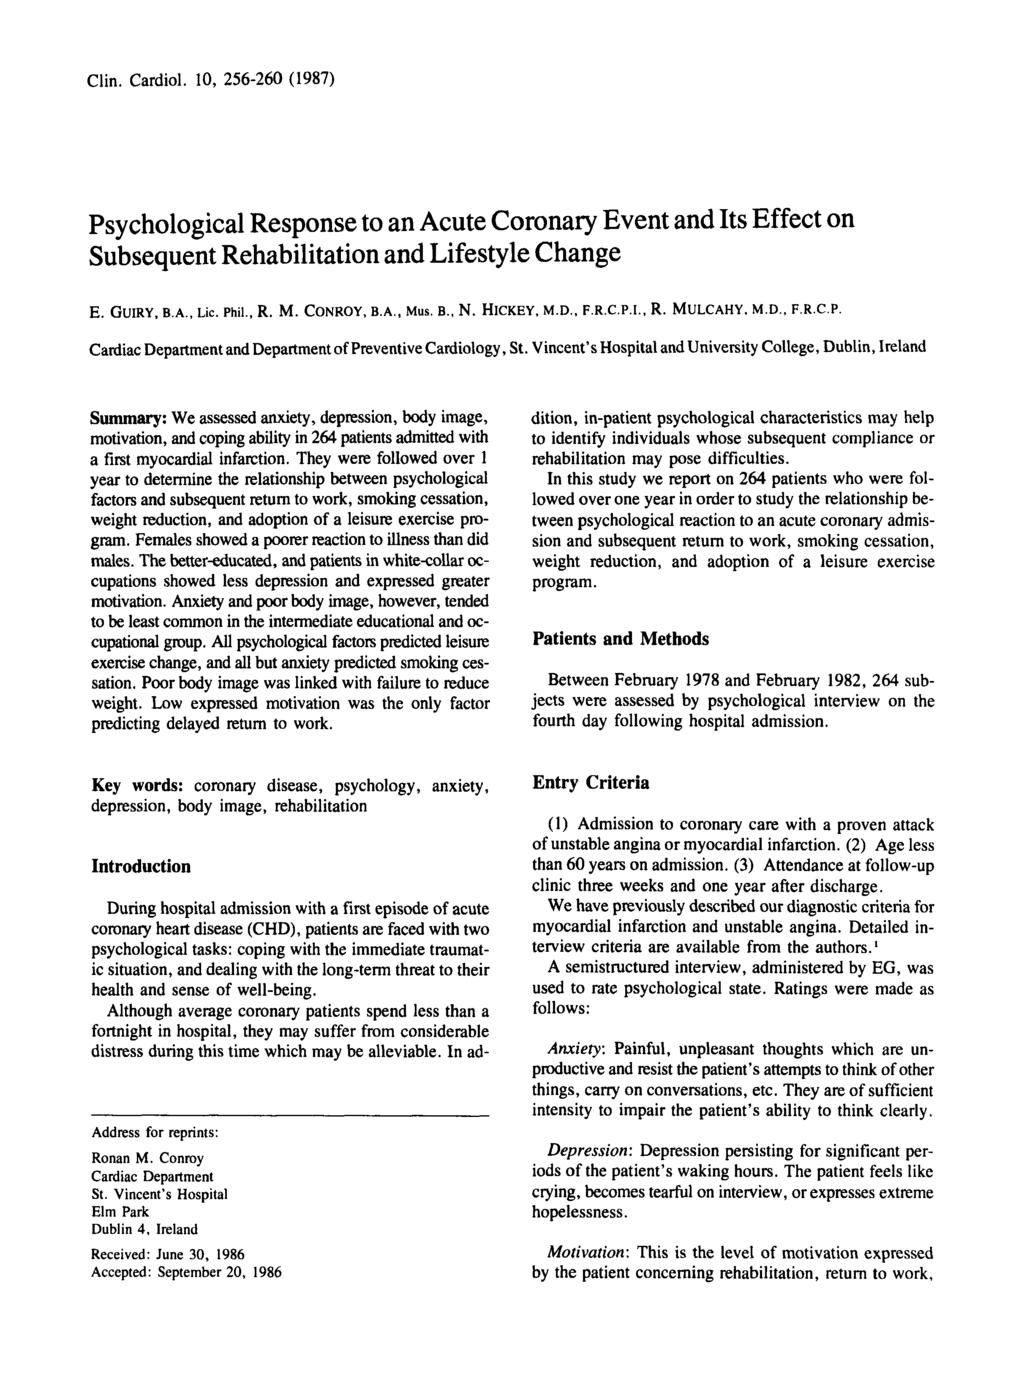 Clin. Cardiol. 10, 256-260 (1987) Psychological Response to an Acute Coronary Event and Its Effect on Subsequent Rehabilitation and Lifestyle Change E. GUIRY, B.A., Lic. Phil., R. M. CONROY, B.A., Mus.